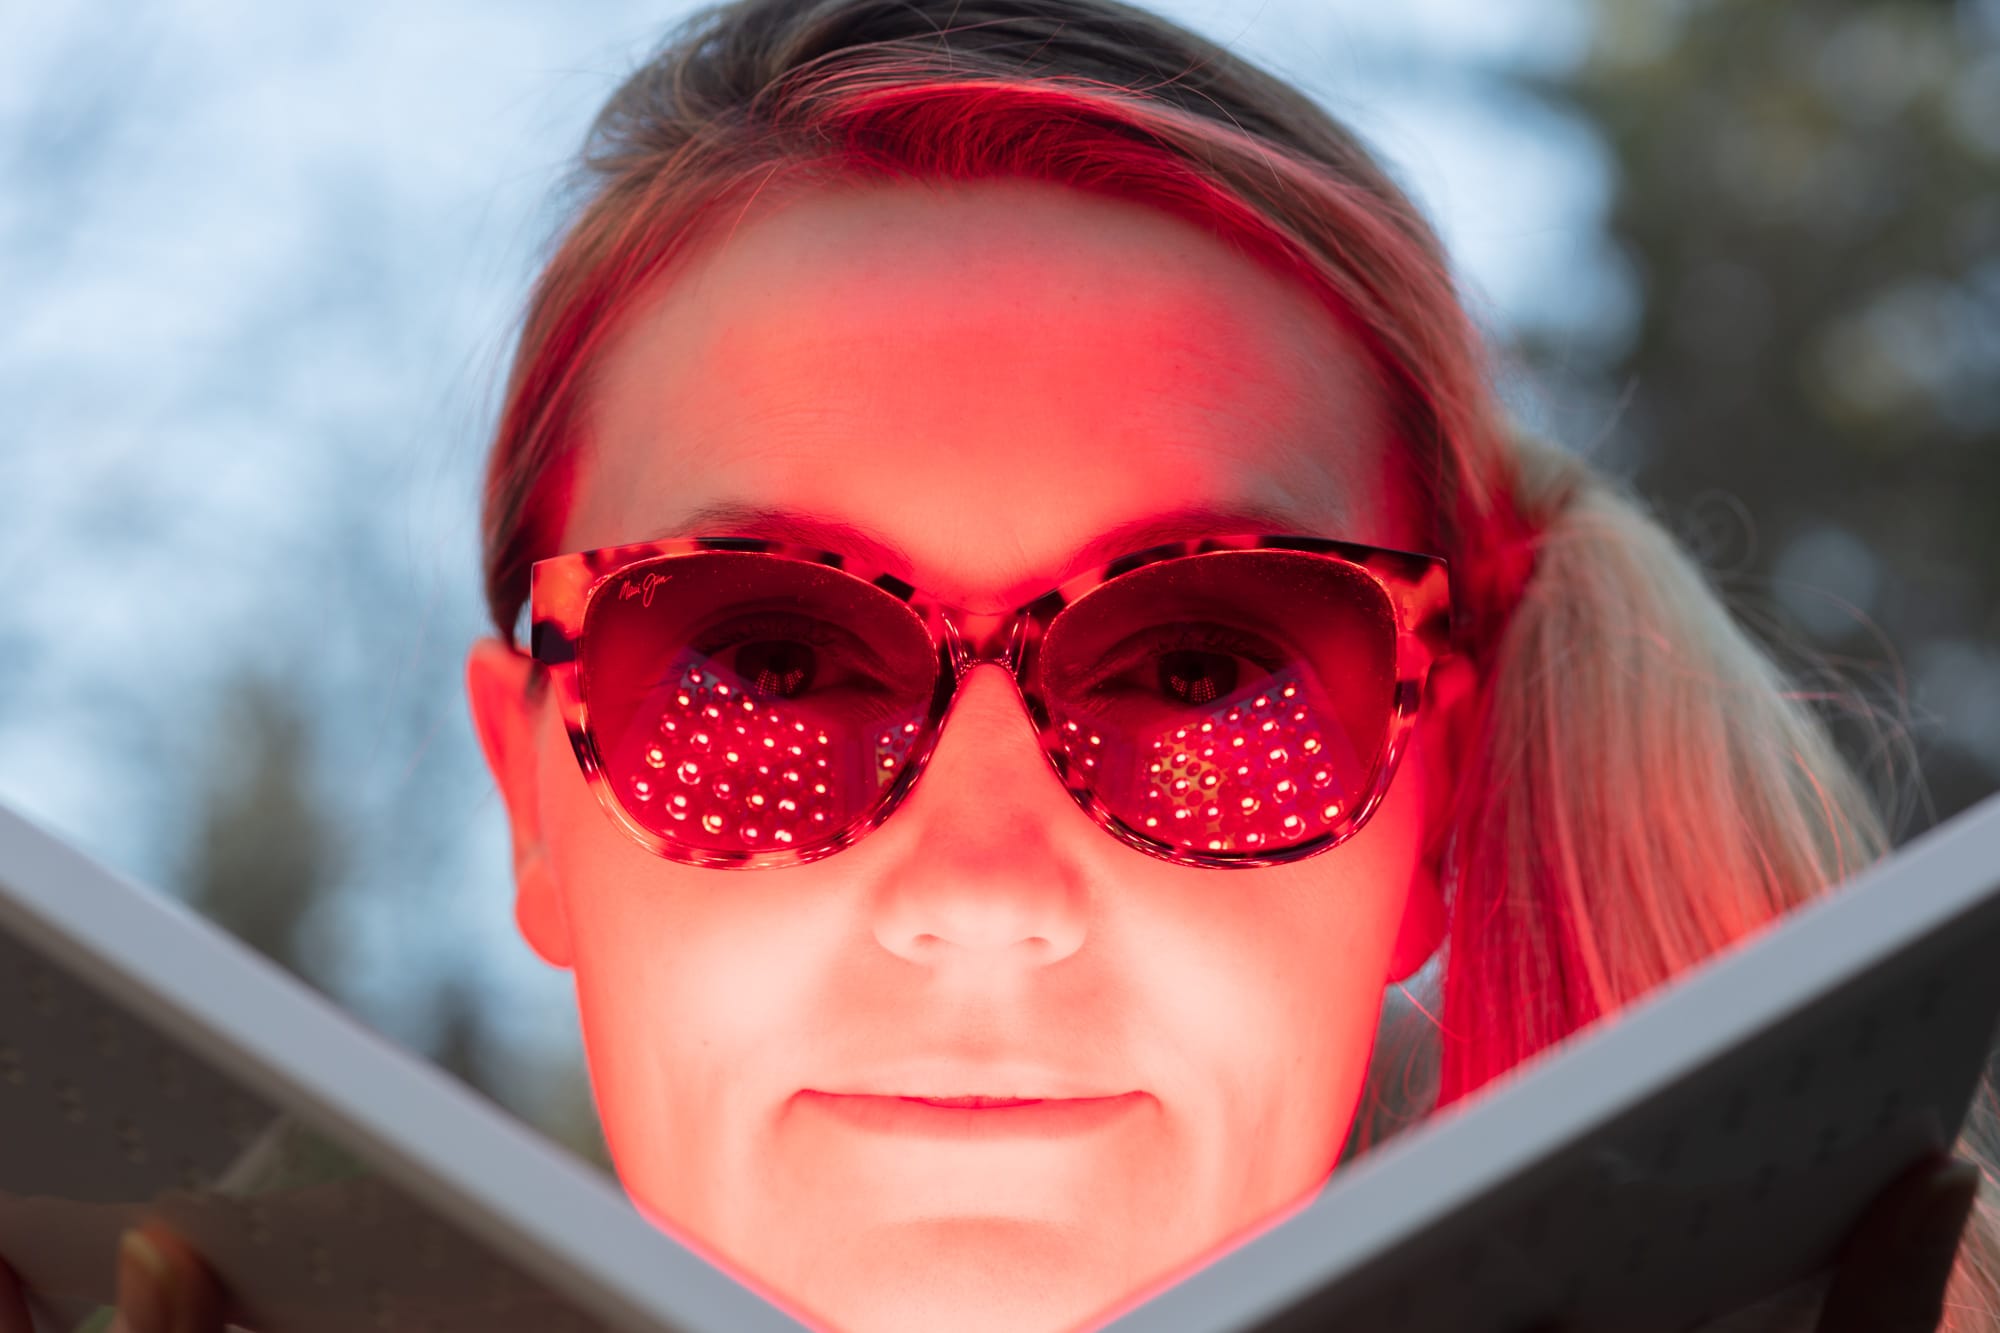 LED red and near-infrared light therapy for wrinkles.